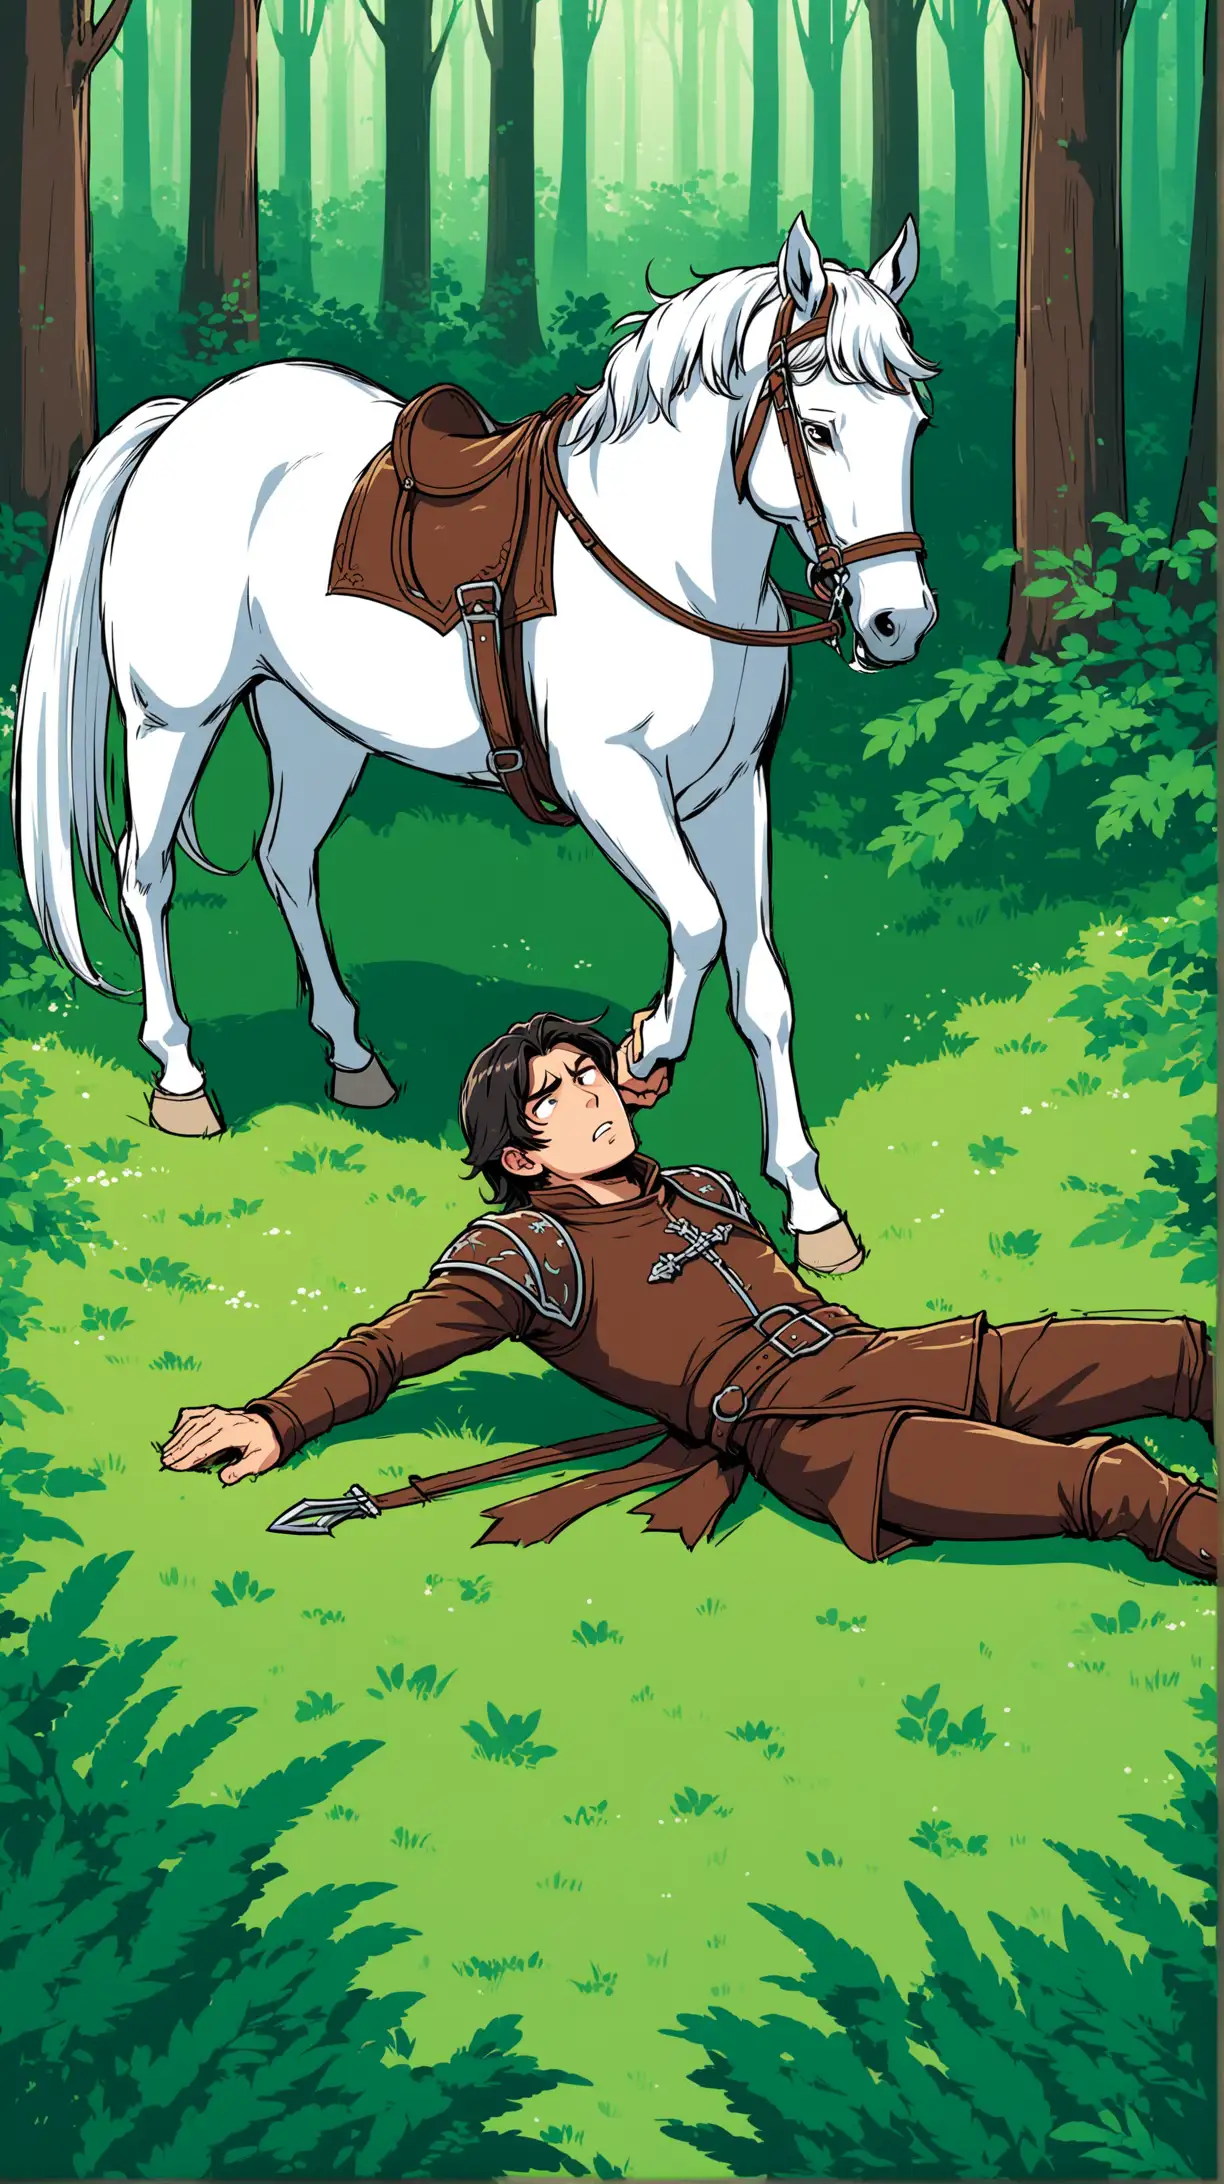 Medieval Rider in Forest Darkhaired Knight in Distress with White Horse